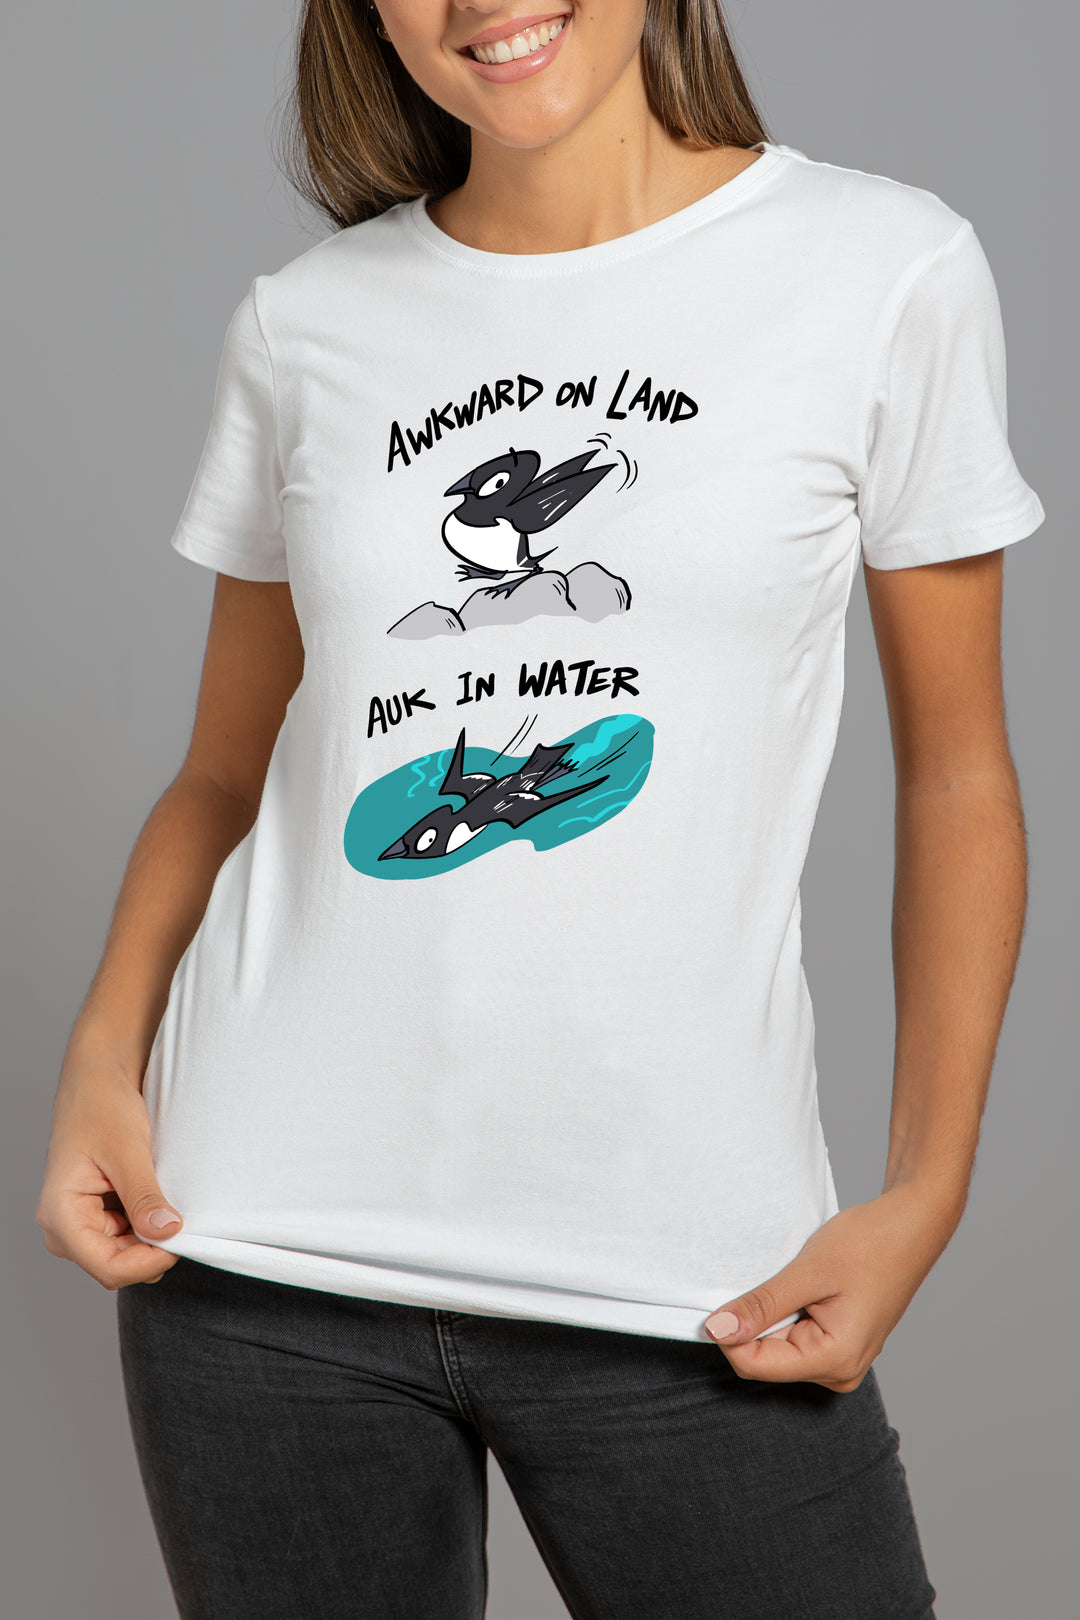 Awkward on Land/in Water T-shirt